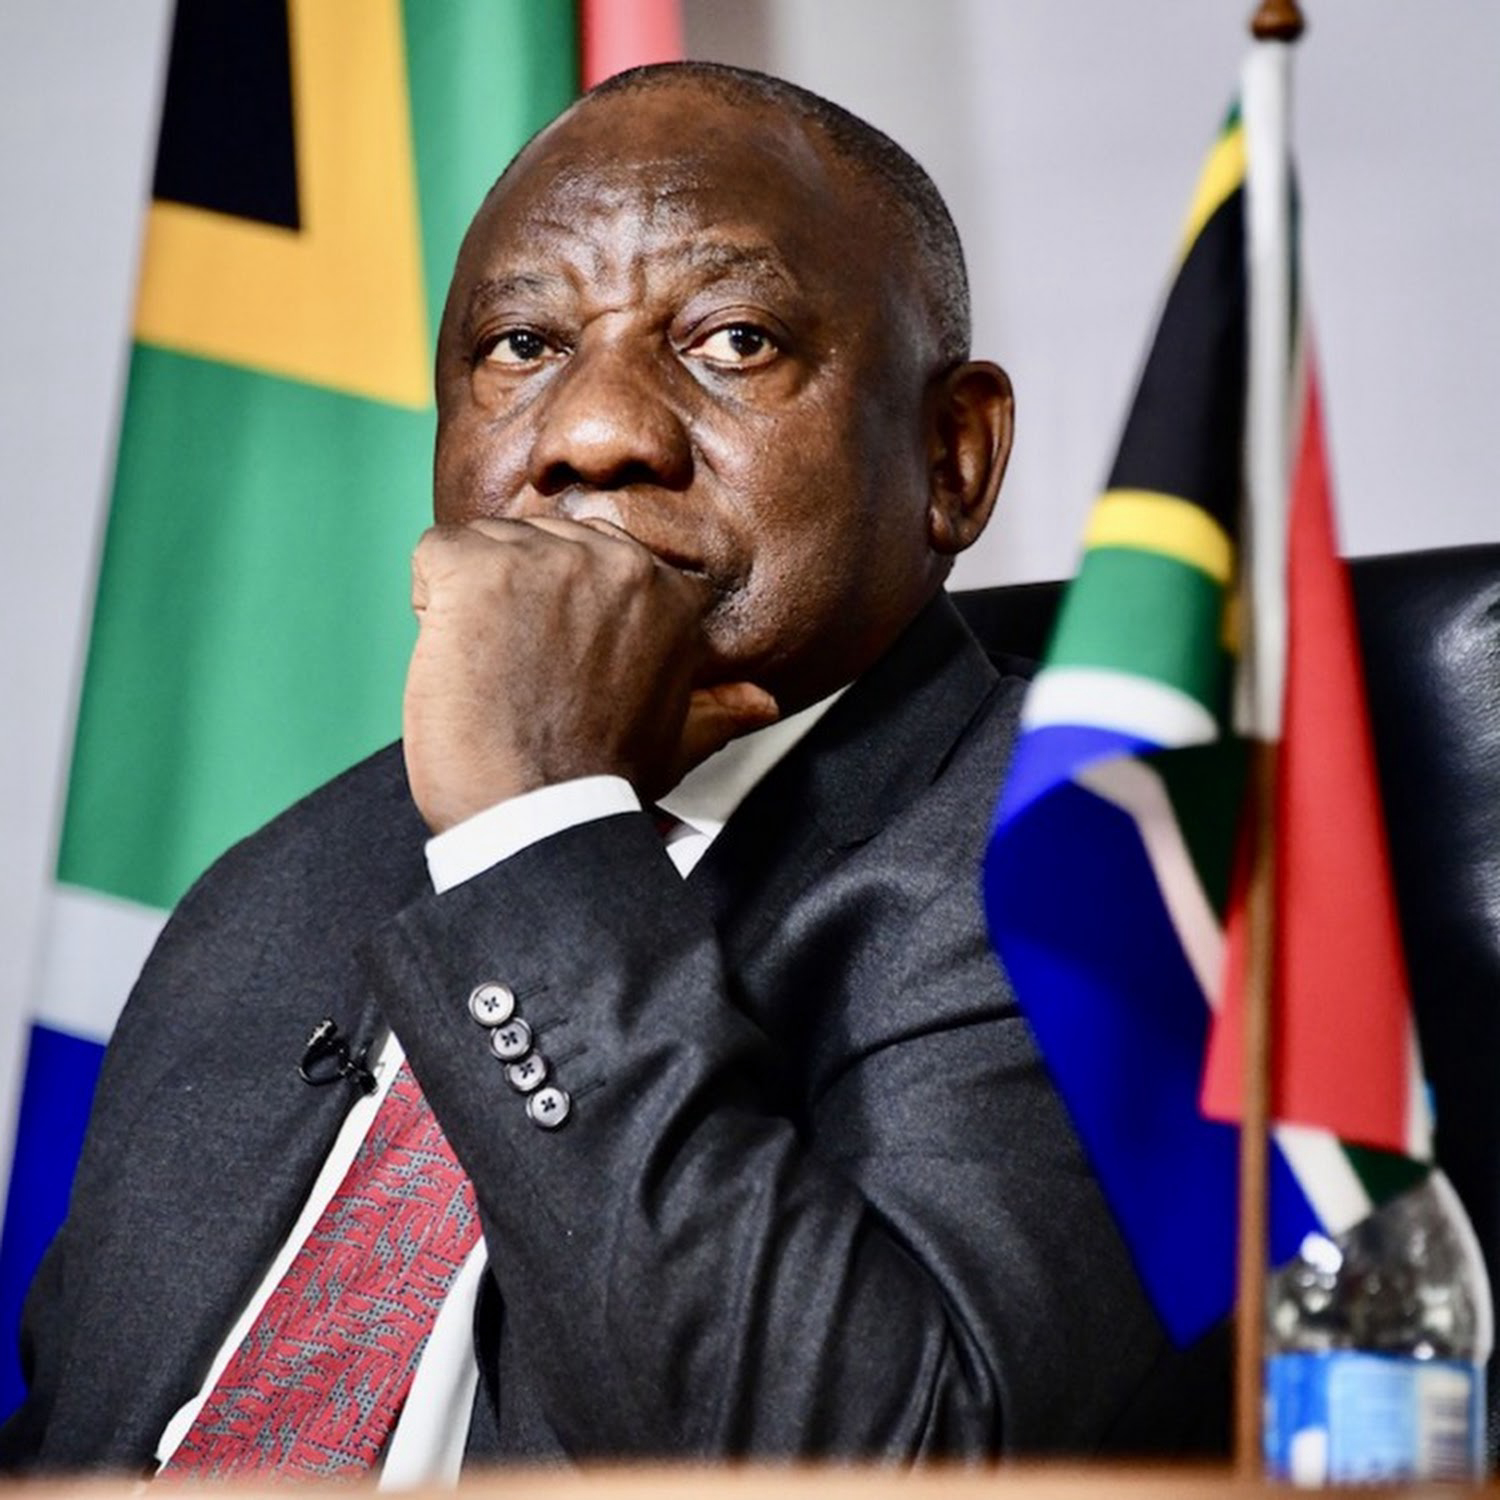 Read more about the article Ramaphosa Survives Impeachment, Set to Win Second Term | The African Exponent.